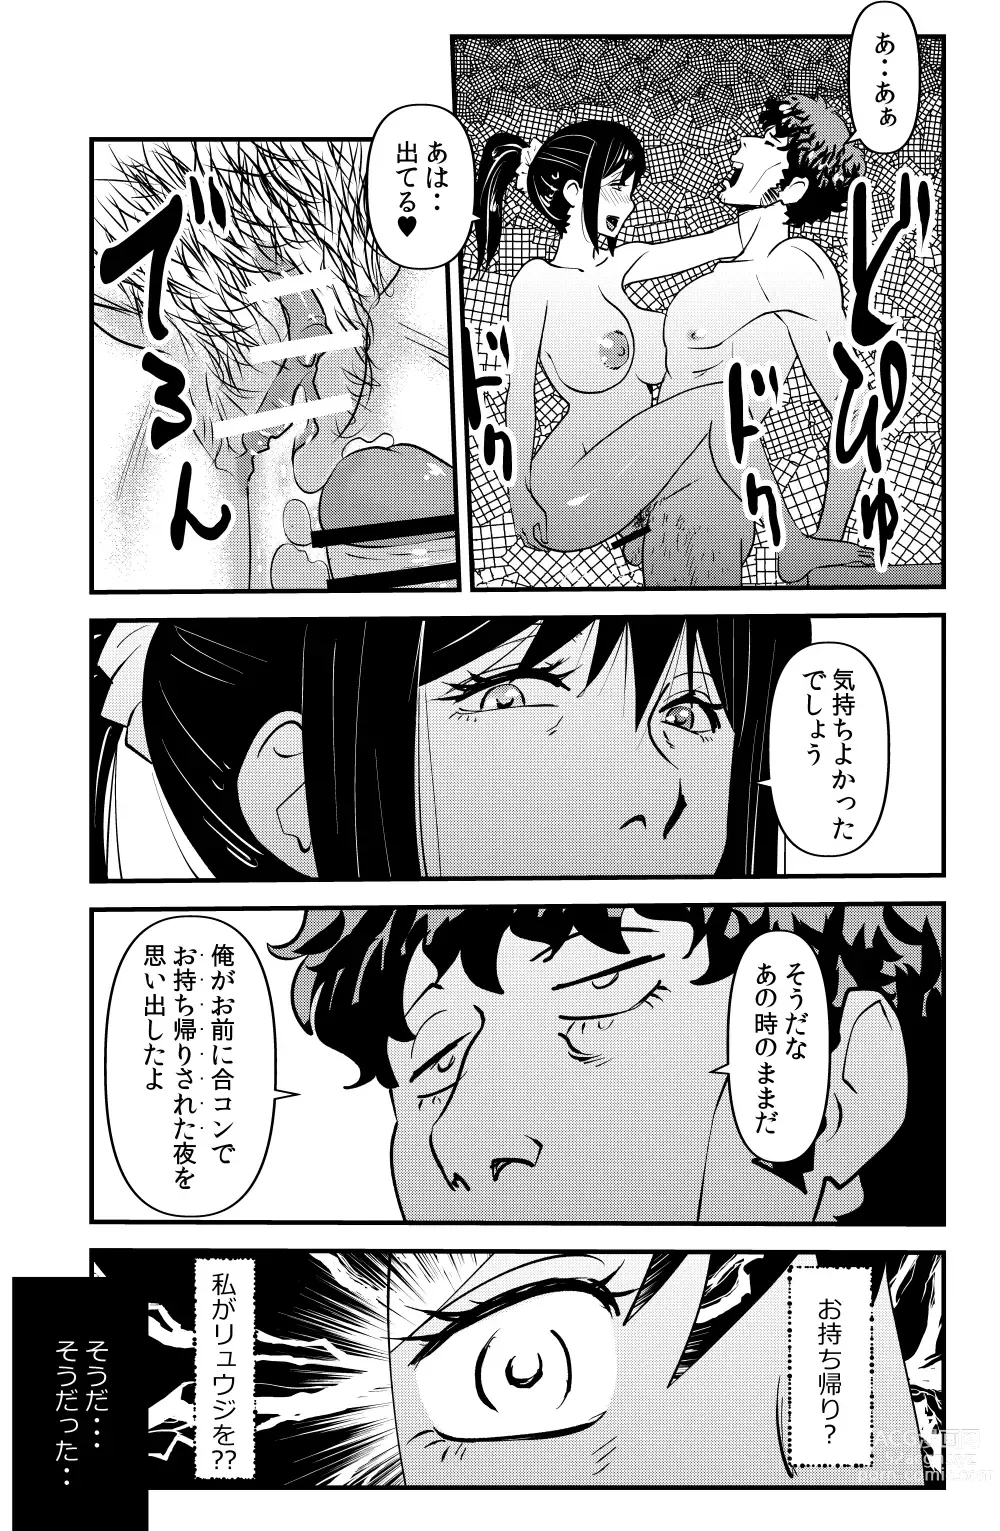 Page 17 of doujinshi ex-lover